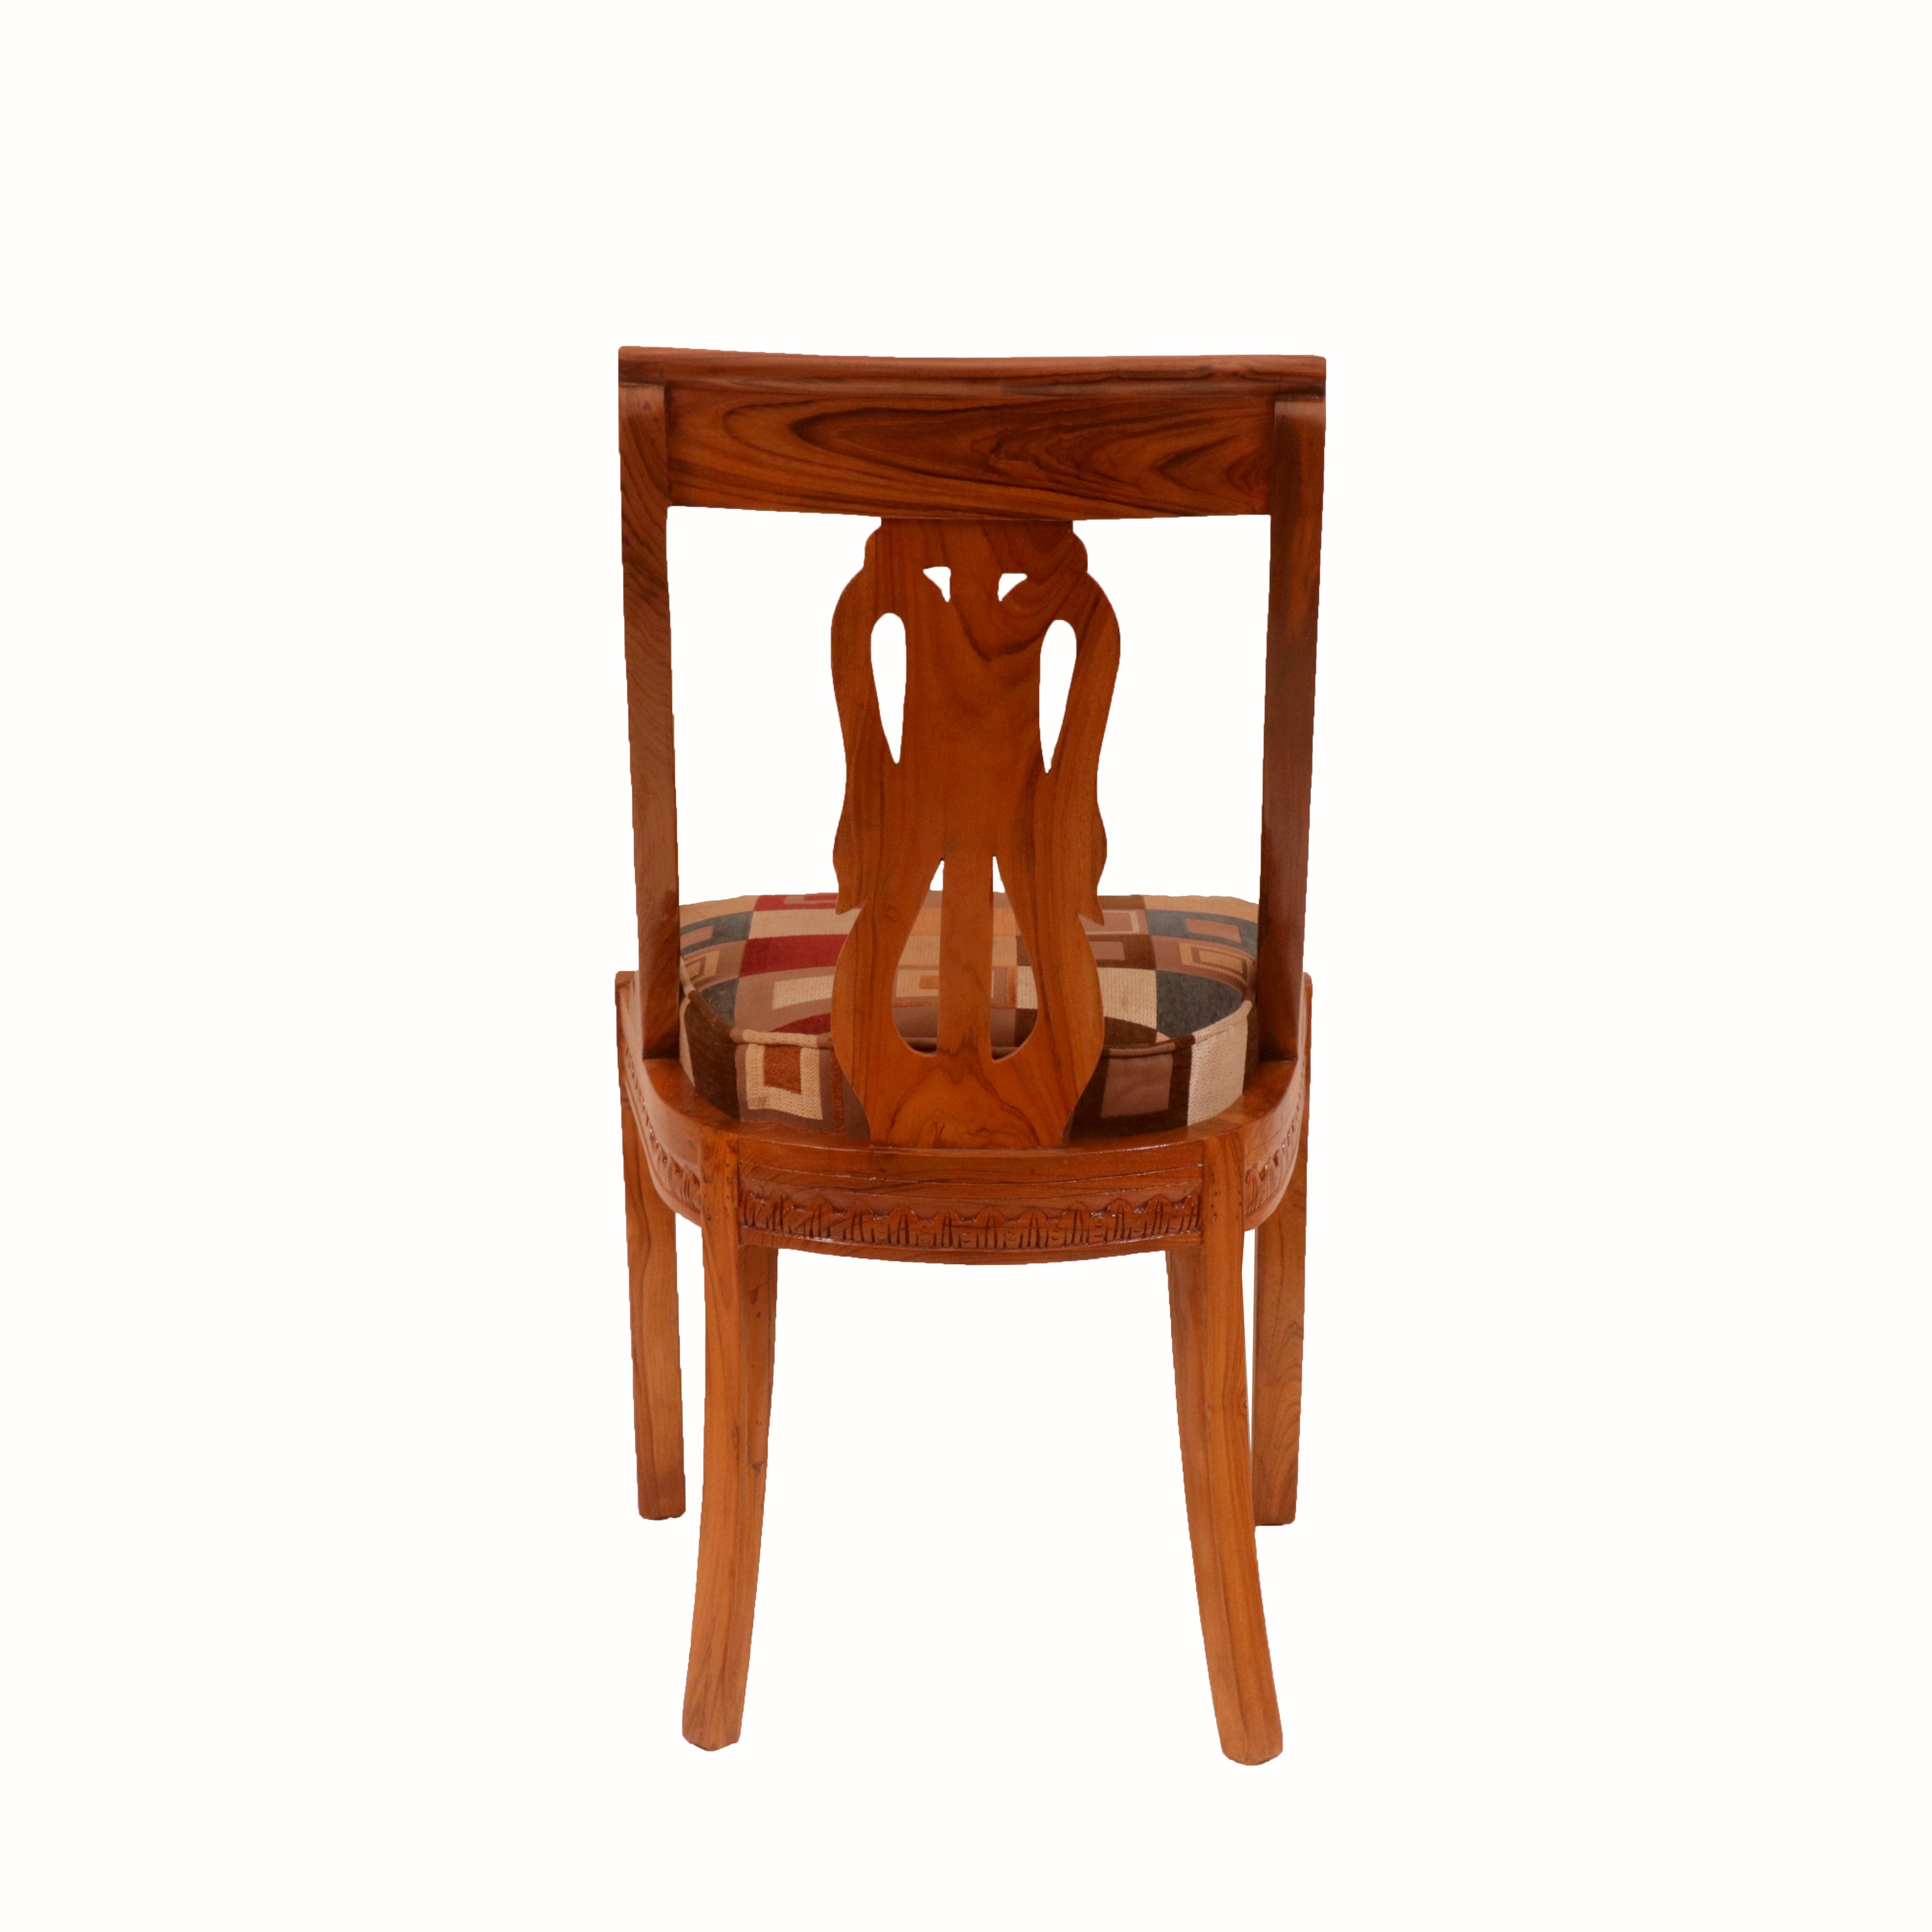 (Set of 2) Flora Wooden Carved Chair Dining Chair